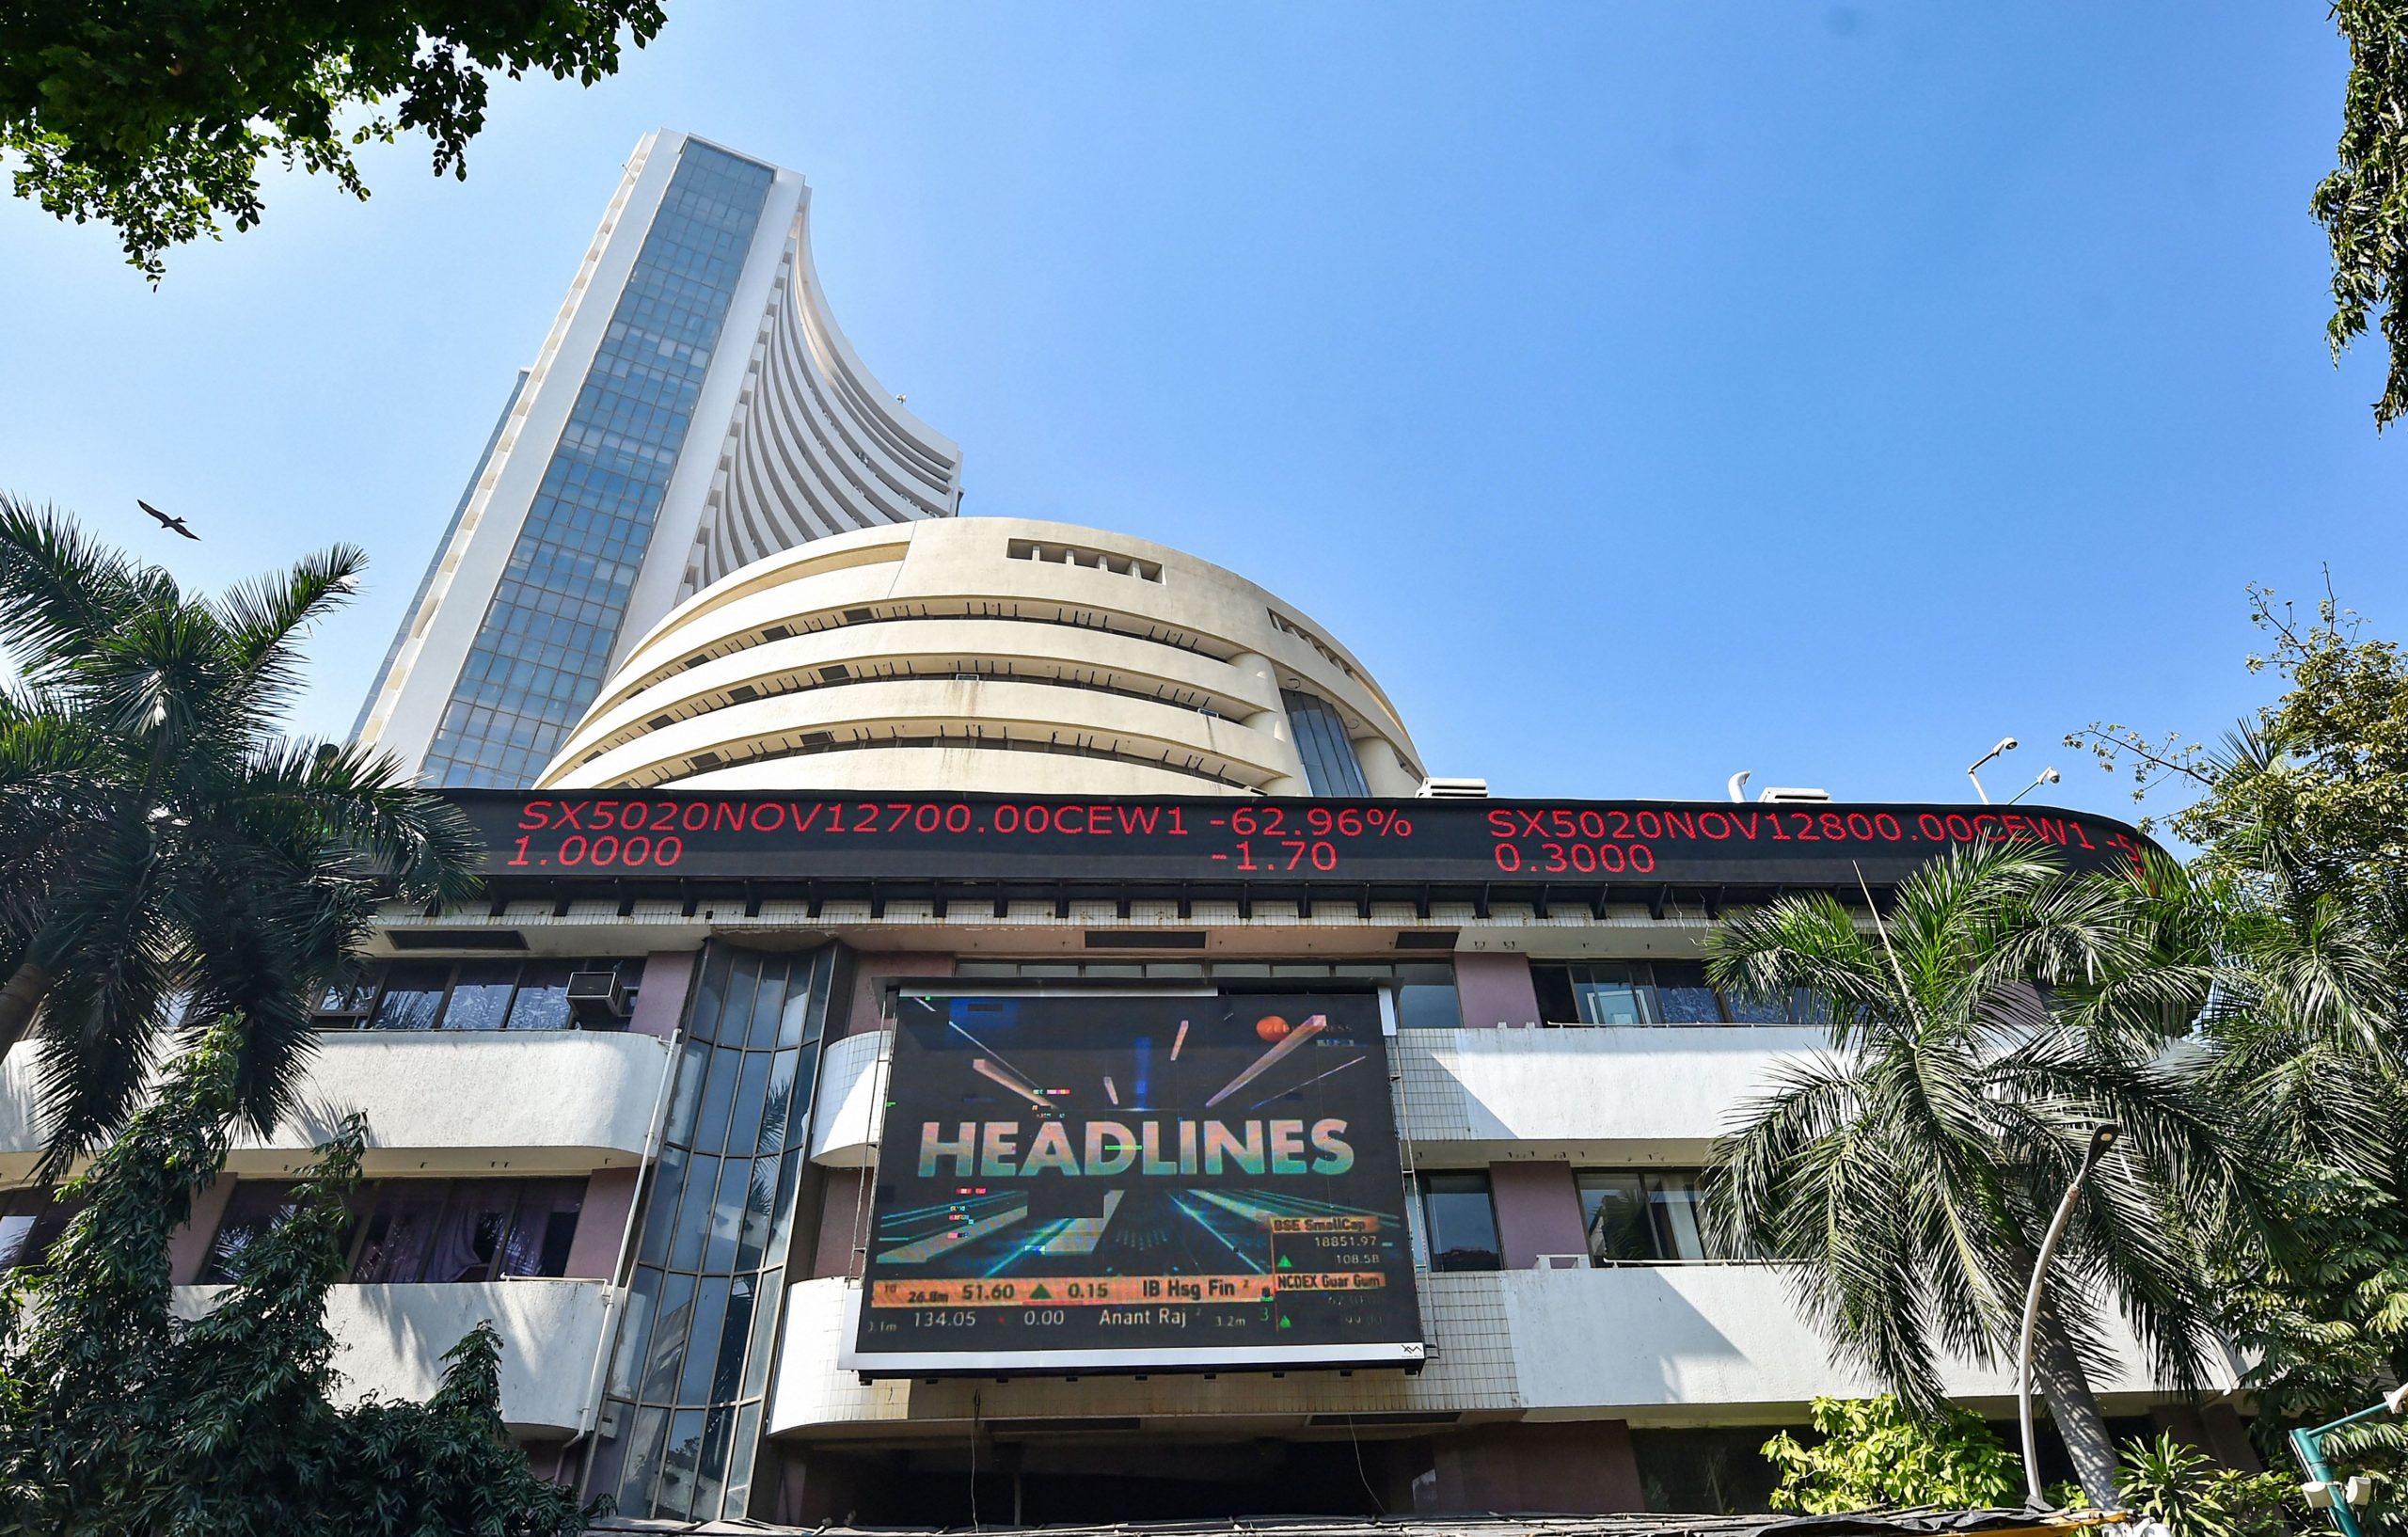 Trending Stocks: ITC, Dr Reddy, Titan, GAIL, Adani Power and others in news today